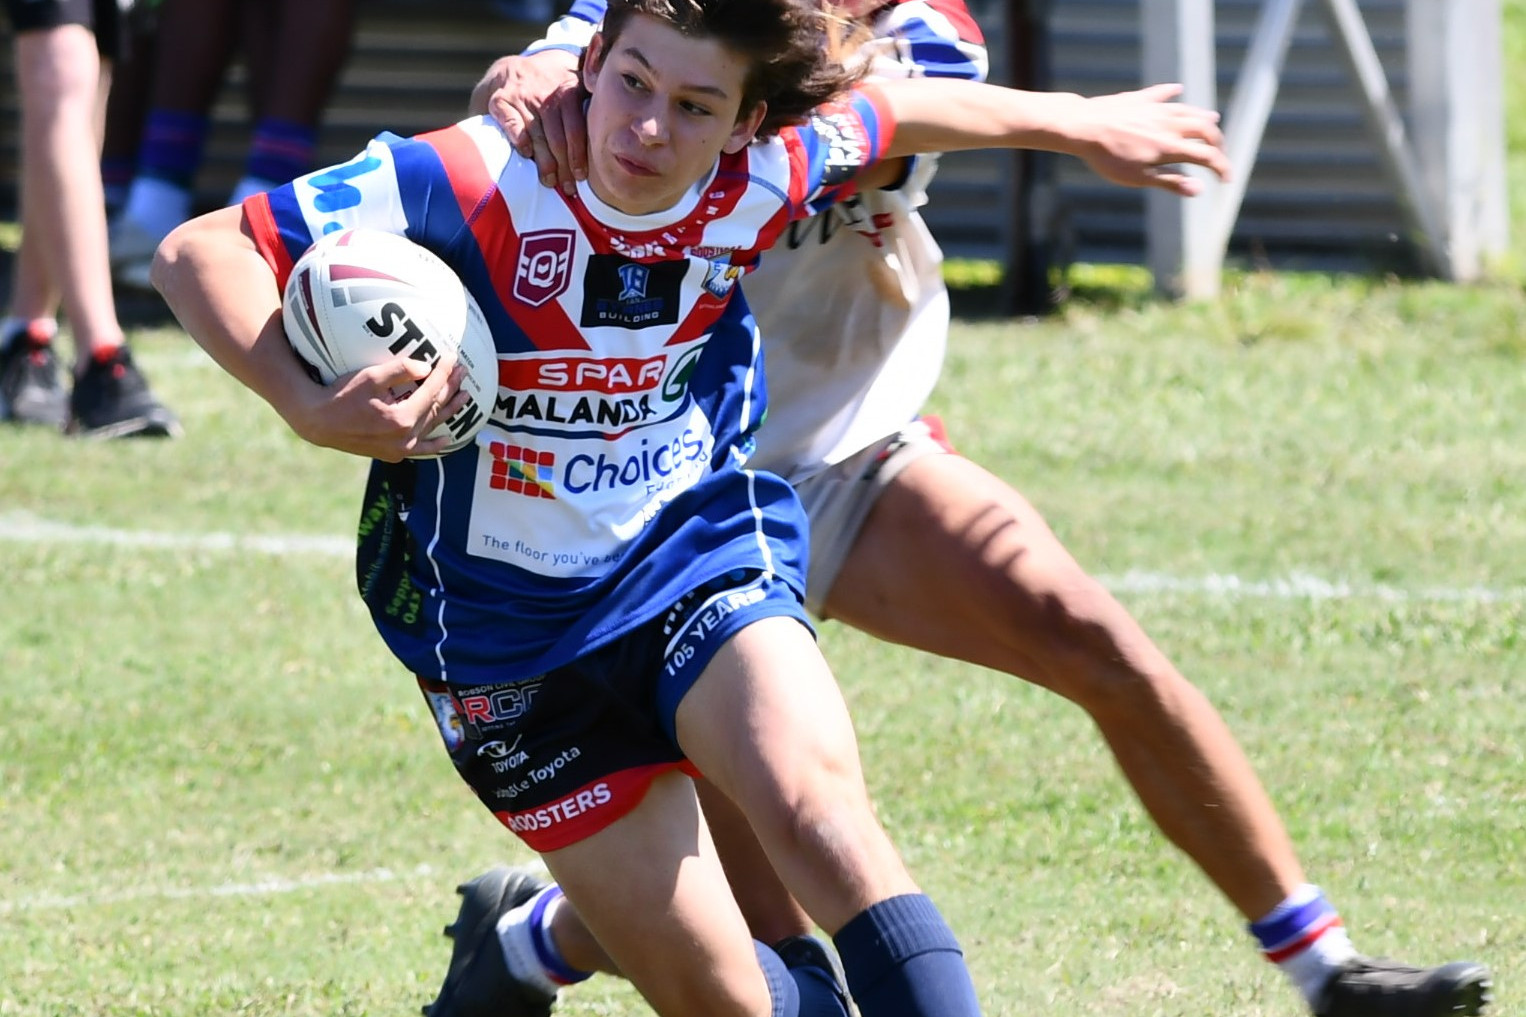 Roosters under 18 winger Dylan Serra against Ivanhoes on Saturday.